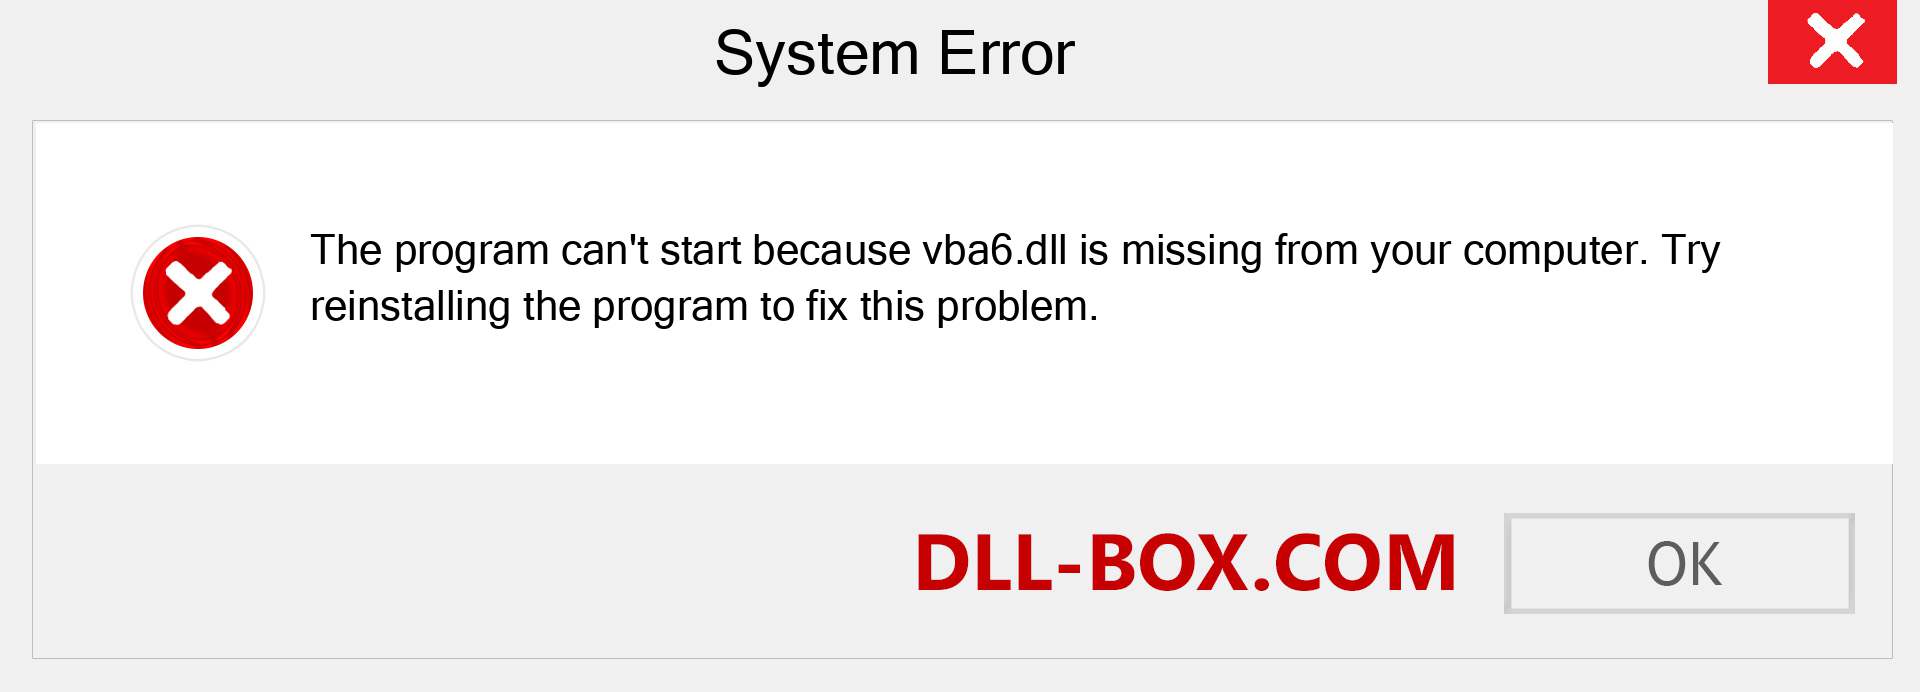  vba6.dll file is missing?. Download for Windows 7, 8, 10 - Fix  vba6 dll Missing Error on Windows, photos, images